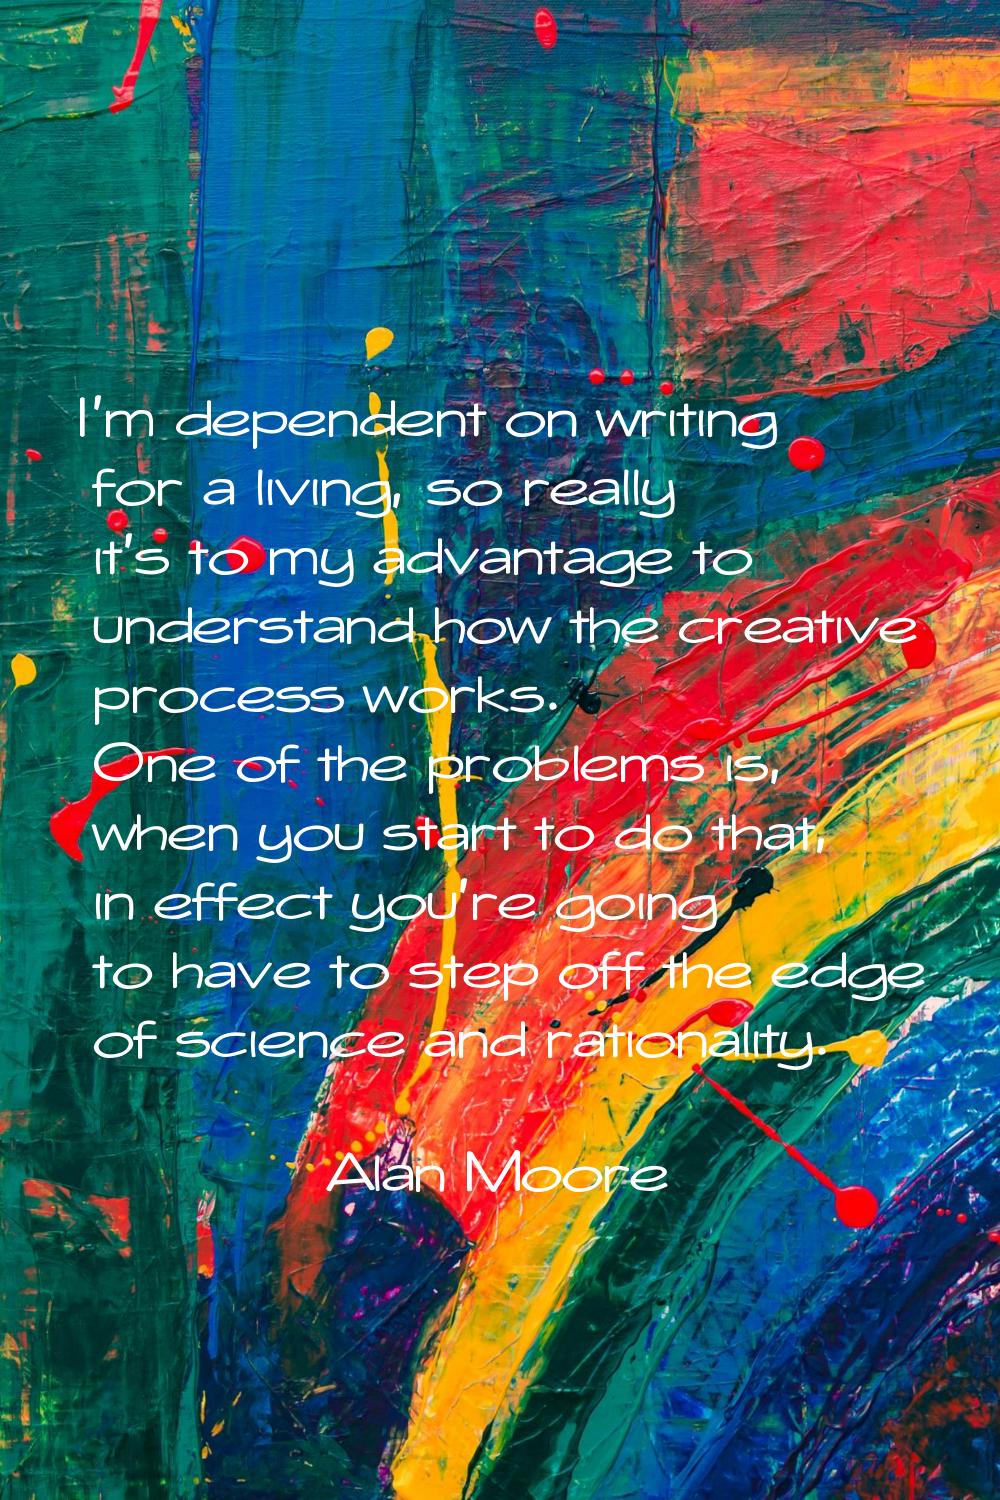 I'm dependent on writing for a living, so really it's to my advantage to understand how the creativ